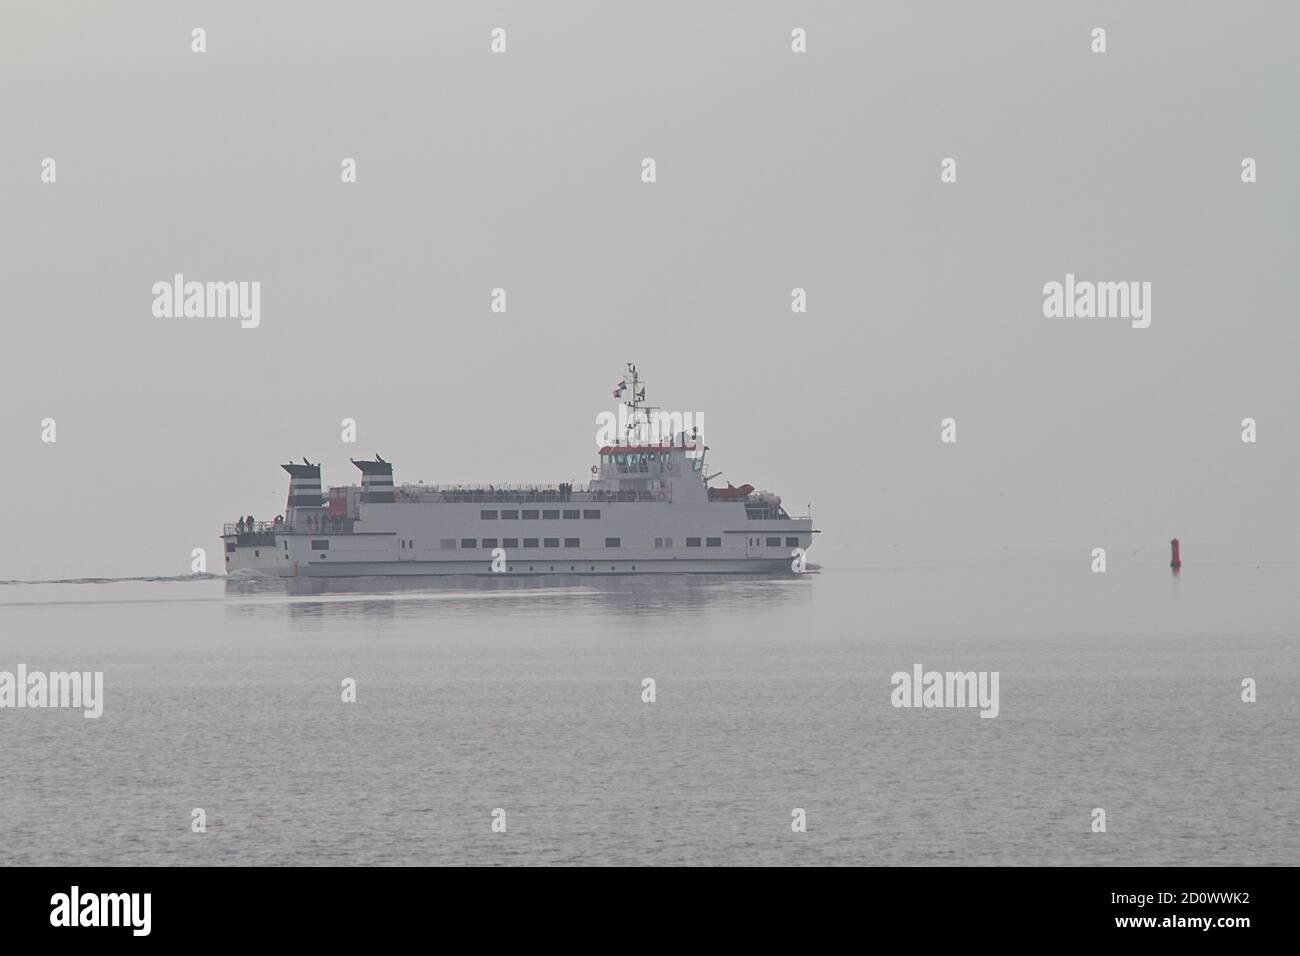 Ferry on as misty calm sea on a grey and misty day Stock Photo